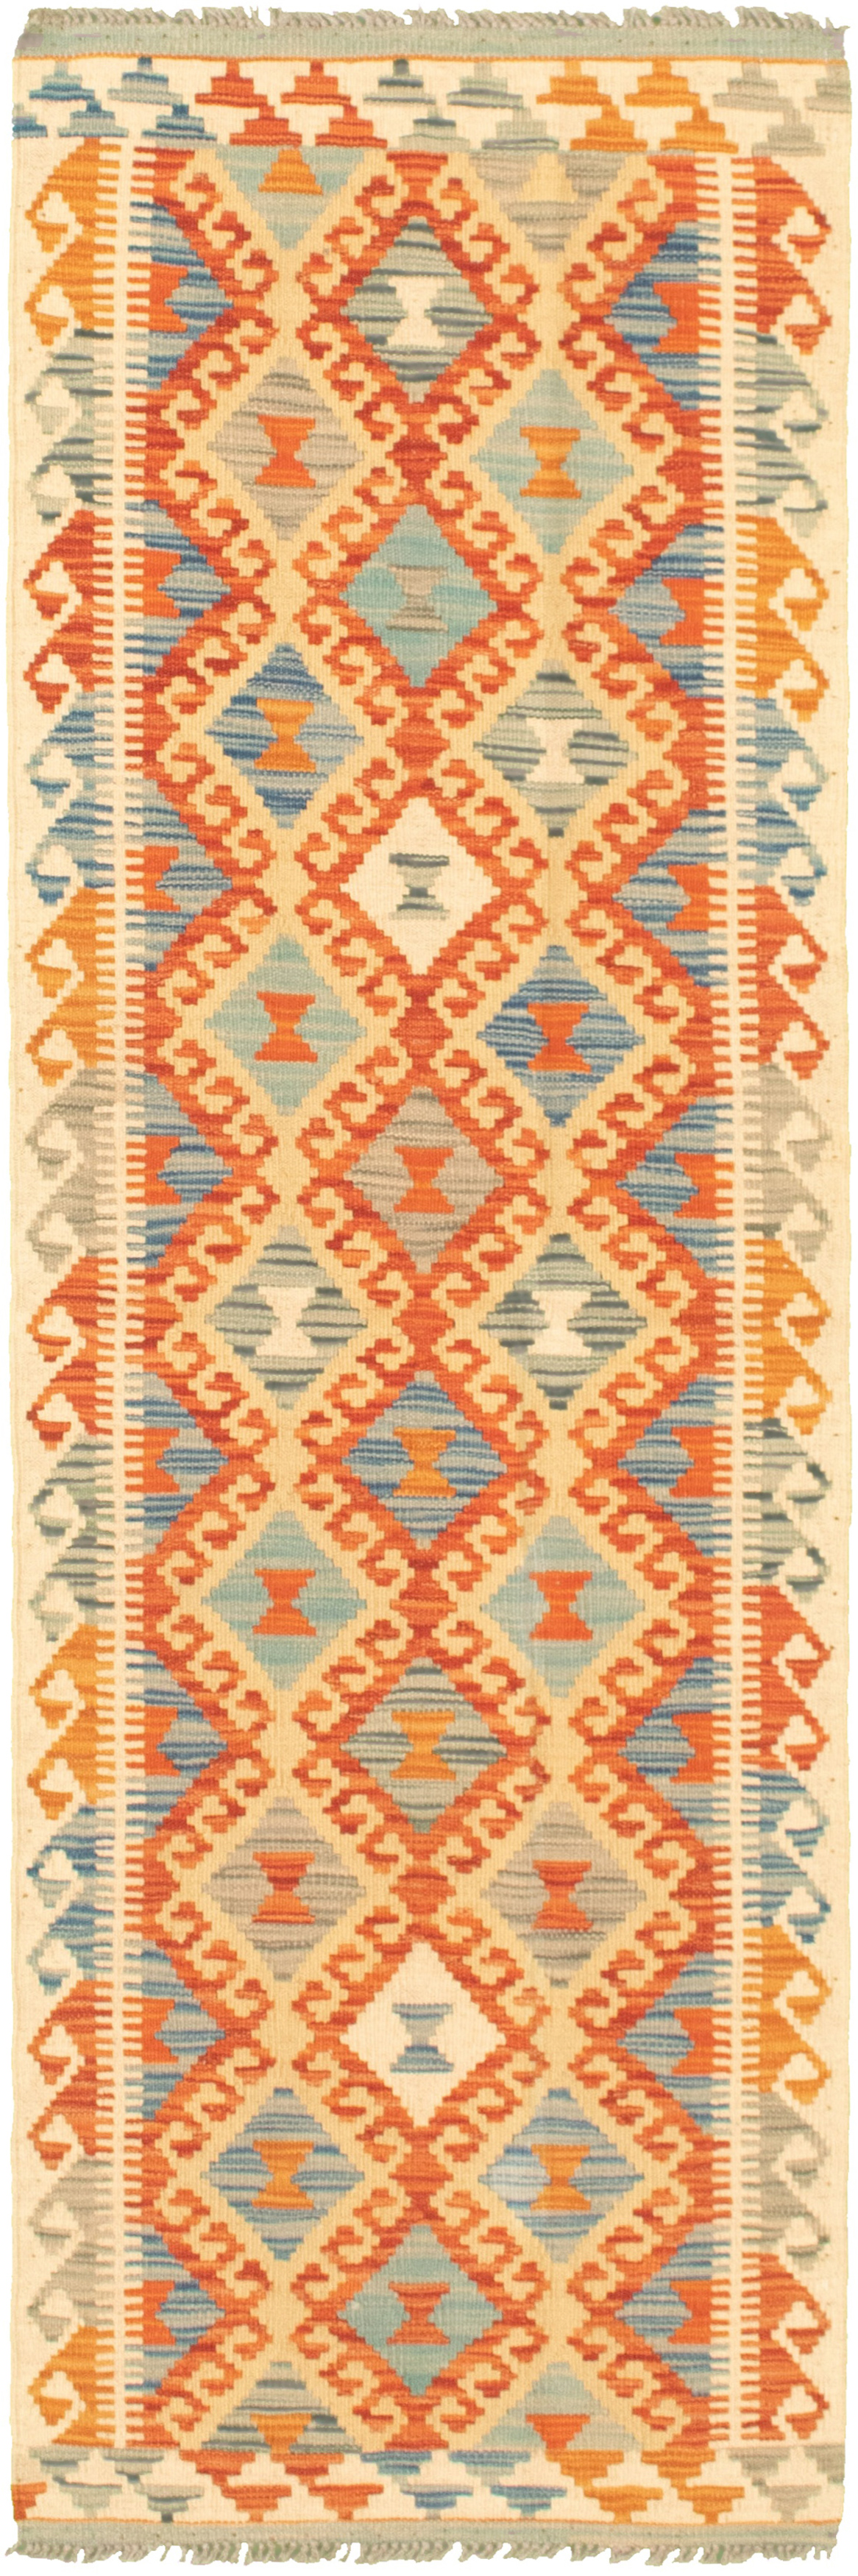 Hand woven Bold and Colorful  Cream Wool Kilim 2'2" x 6'10" Size: 2'2" x 6'10"  